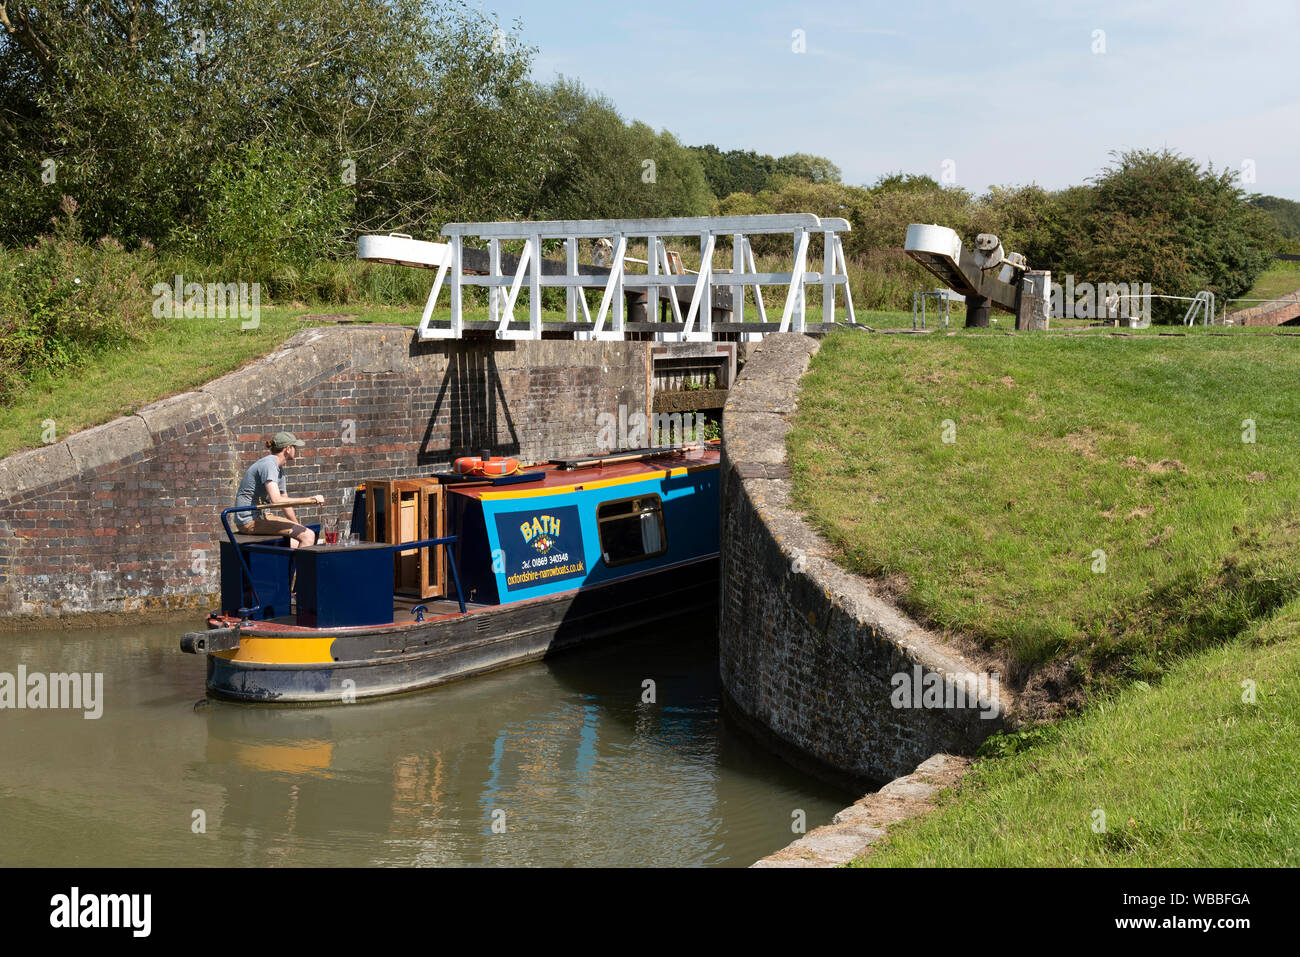 Devizes, Wiltshire, England, UK. August 2019. Narrowboat entering a lock on the Caen Hill flight of locks on the Kennet and Avon Canal. Stock Photo